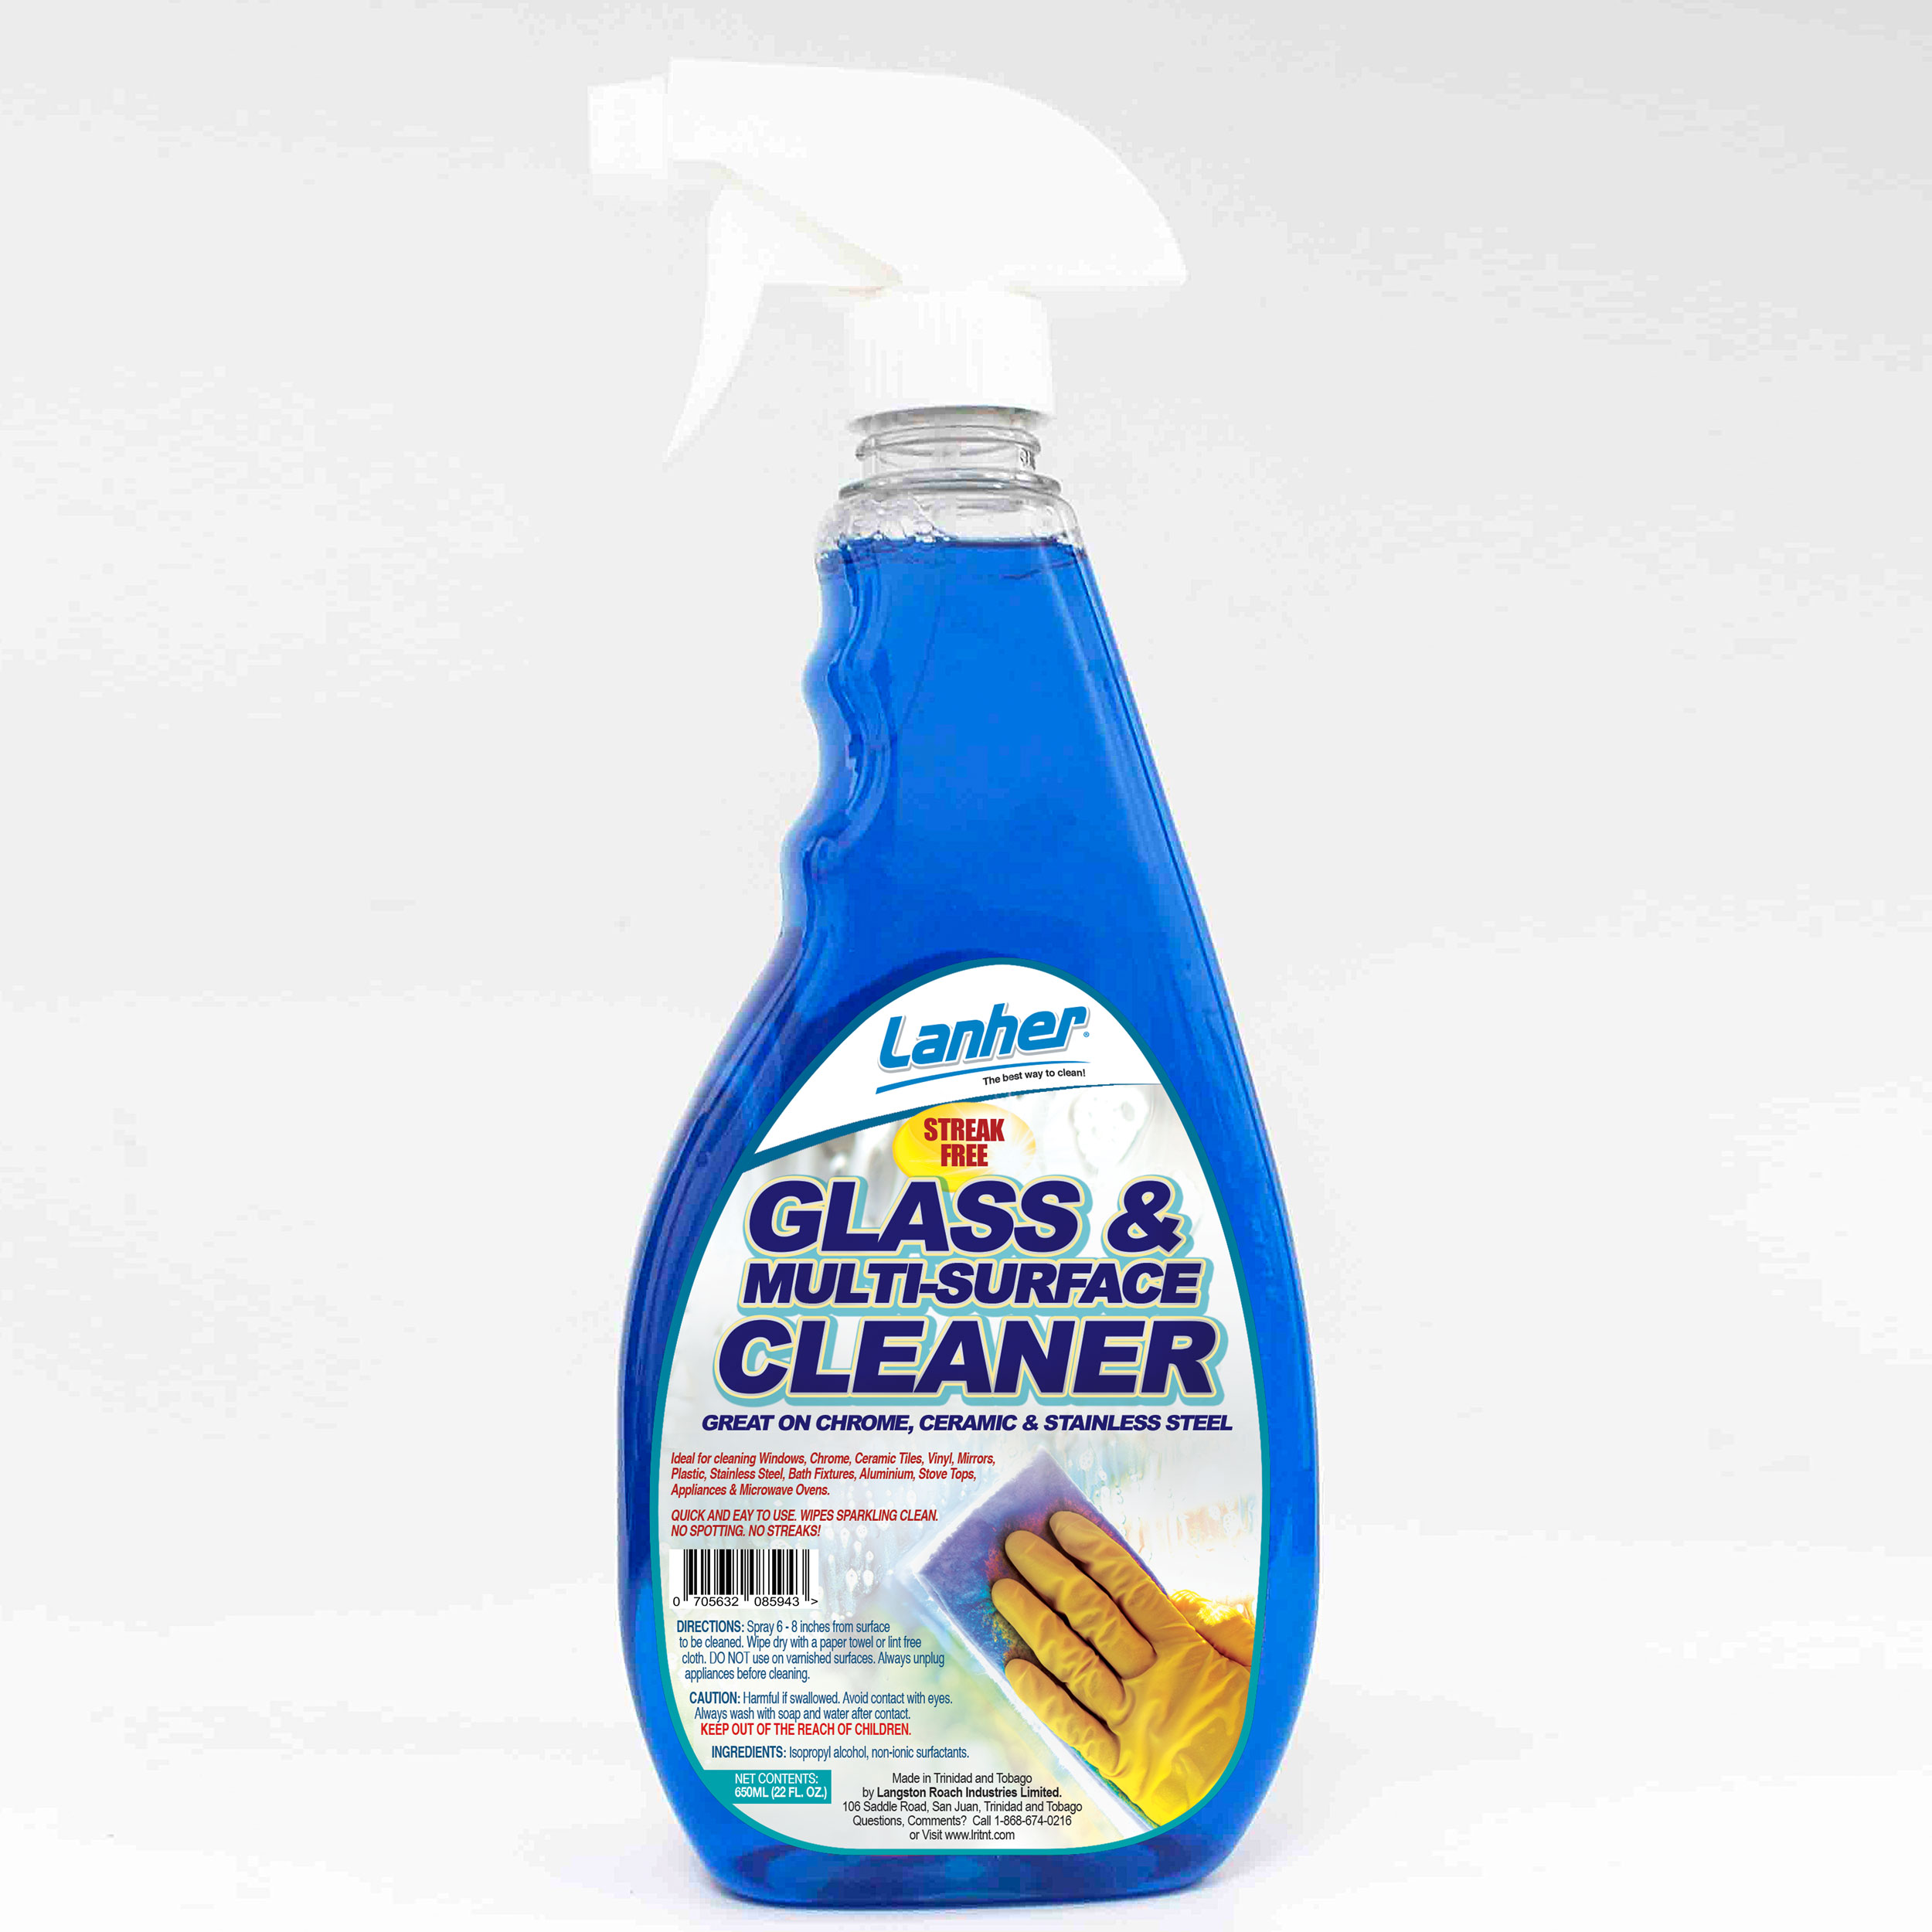 Lanher Glass & Multi-Surface Cleaner – Langston Roach Industries Limited